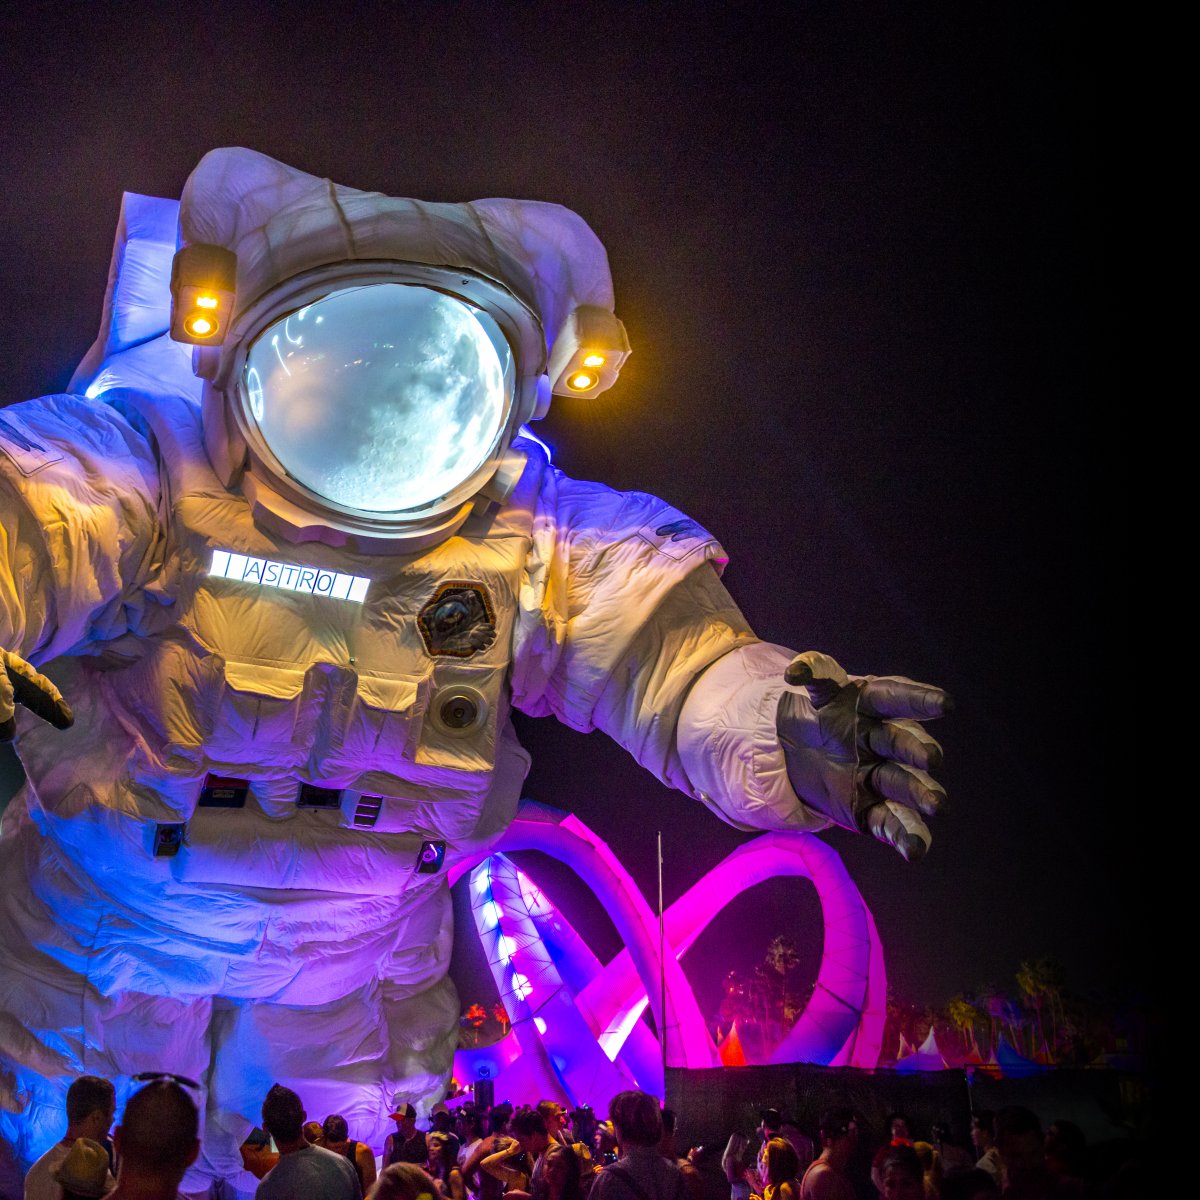 Image of a large astronaut art installation with a ferris wheel in the background during night time